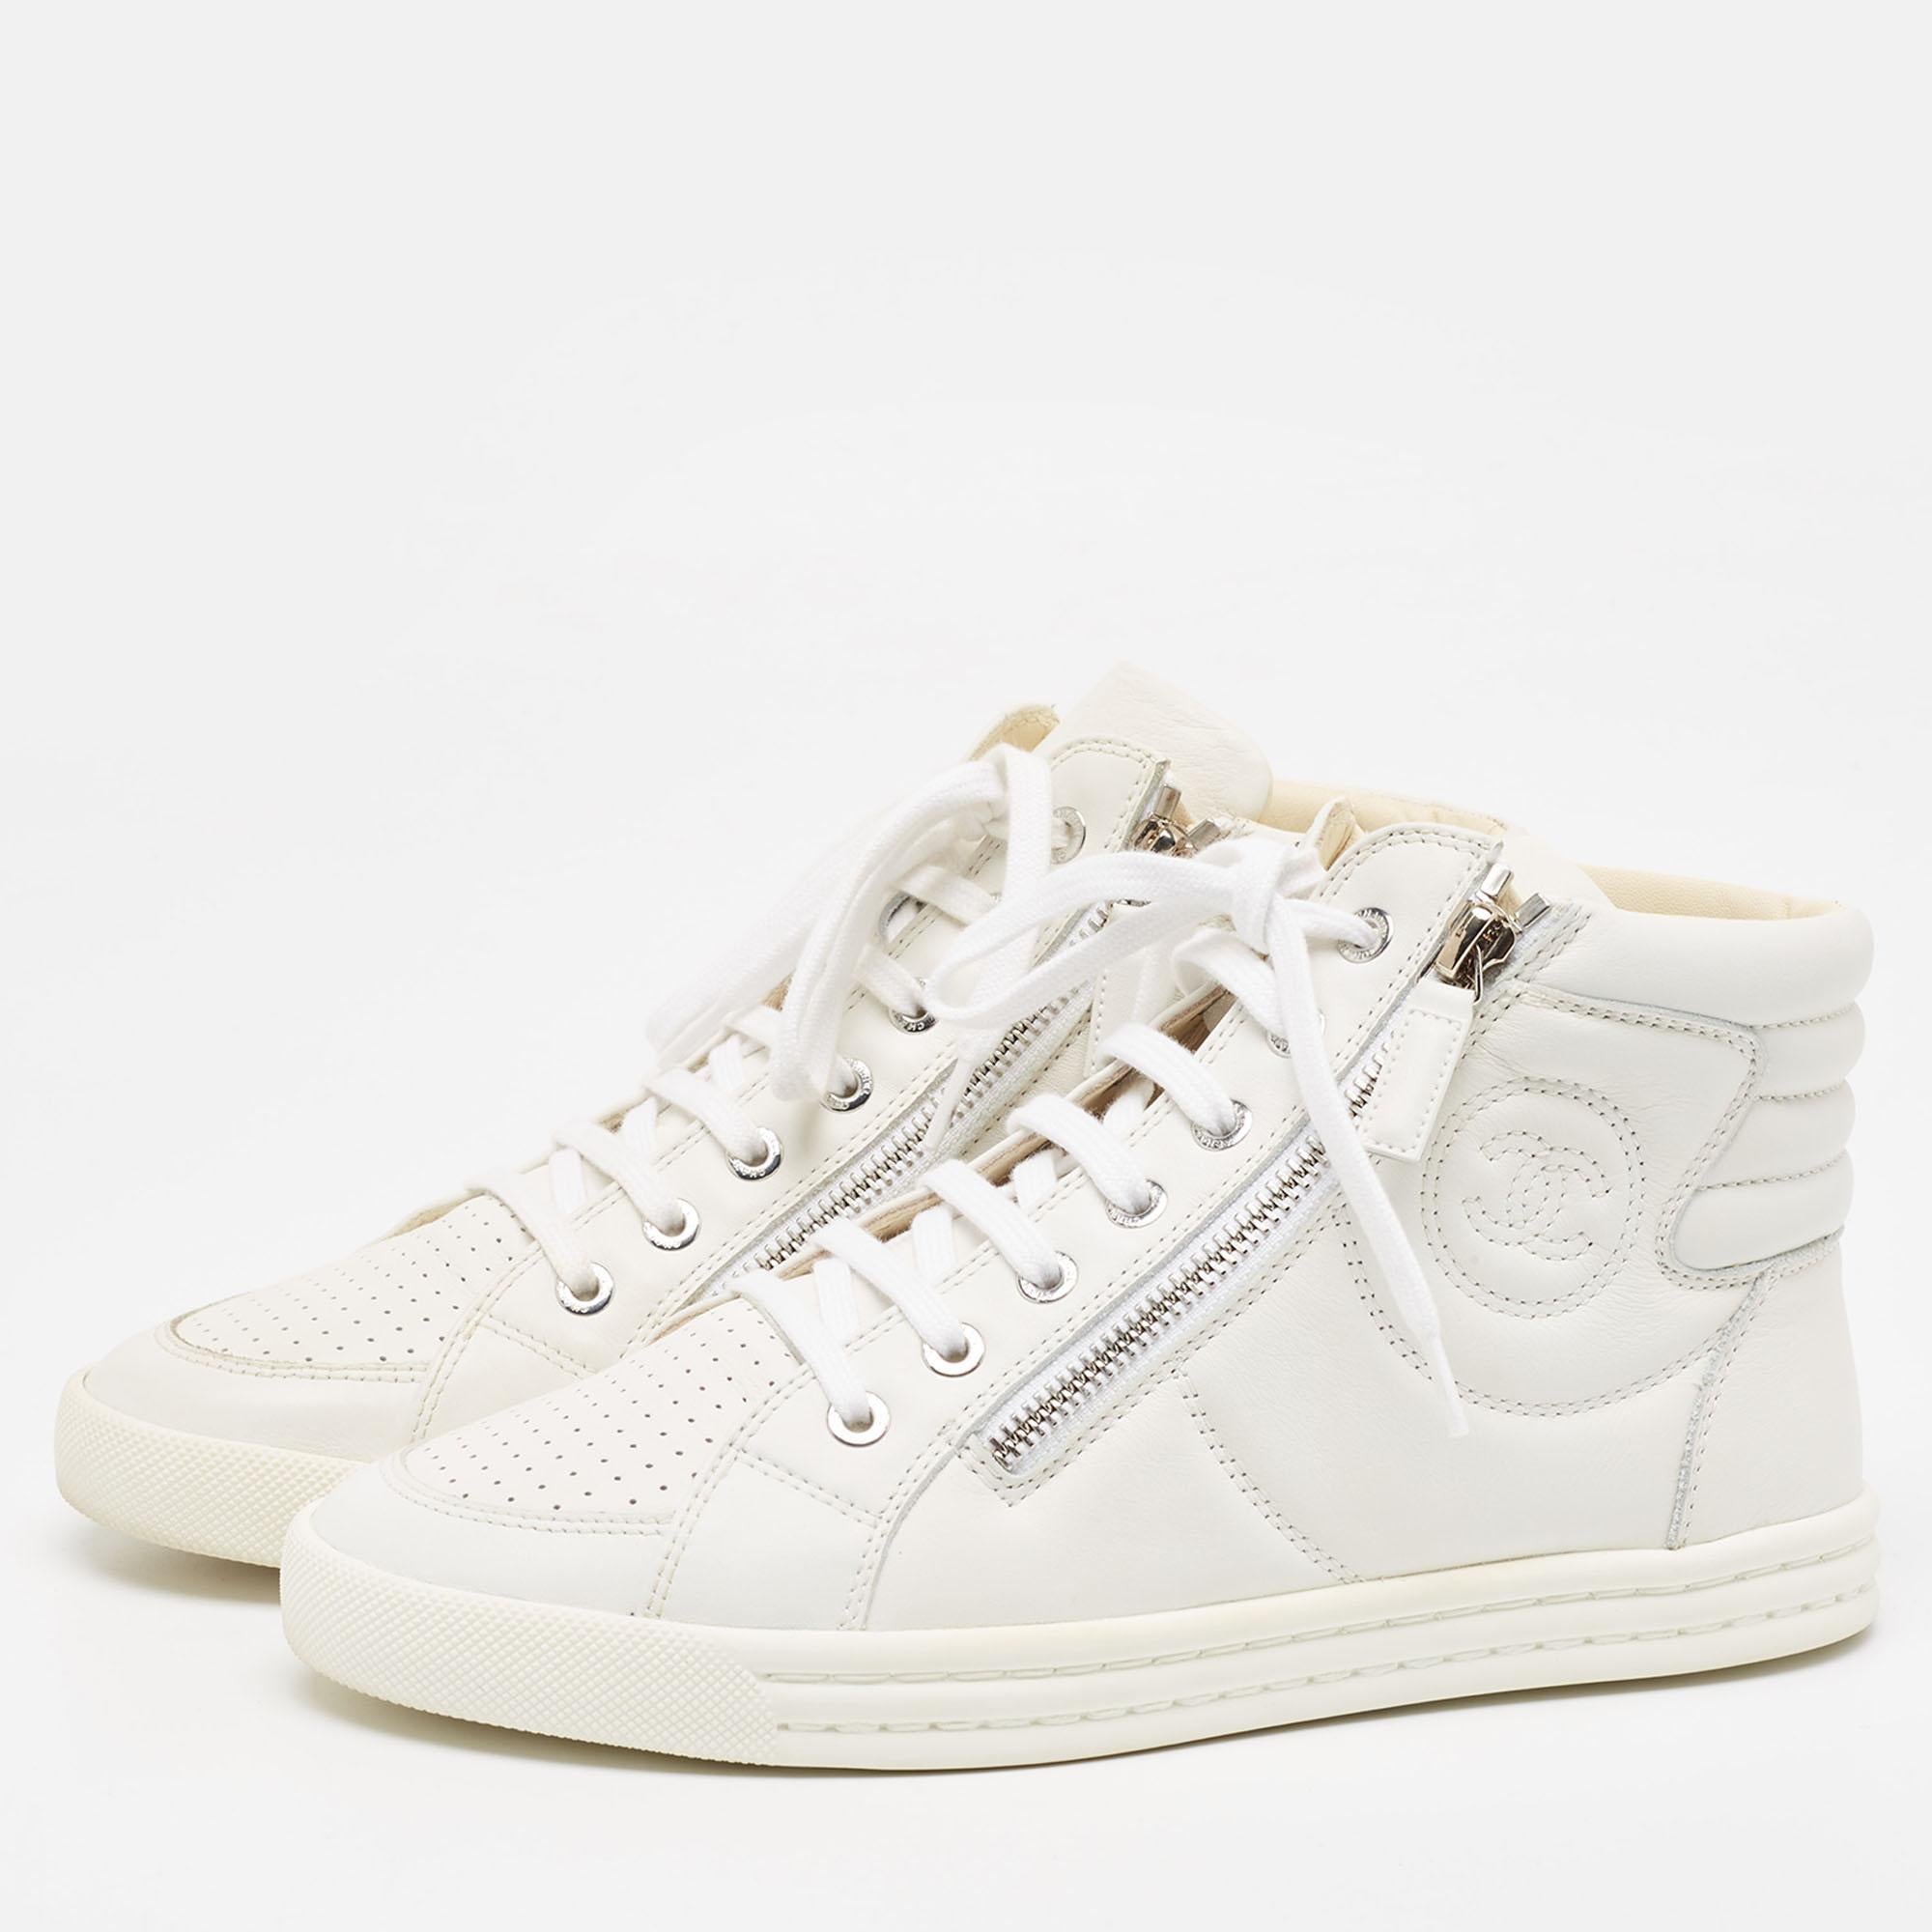 Chanel White Leather CC High Top Sneakers Size 37.5 4